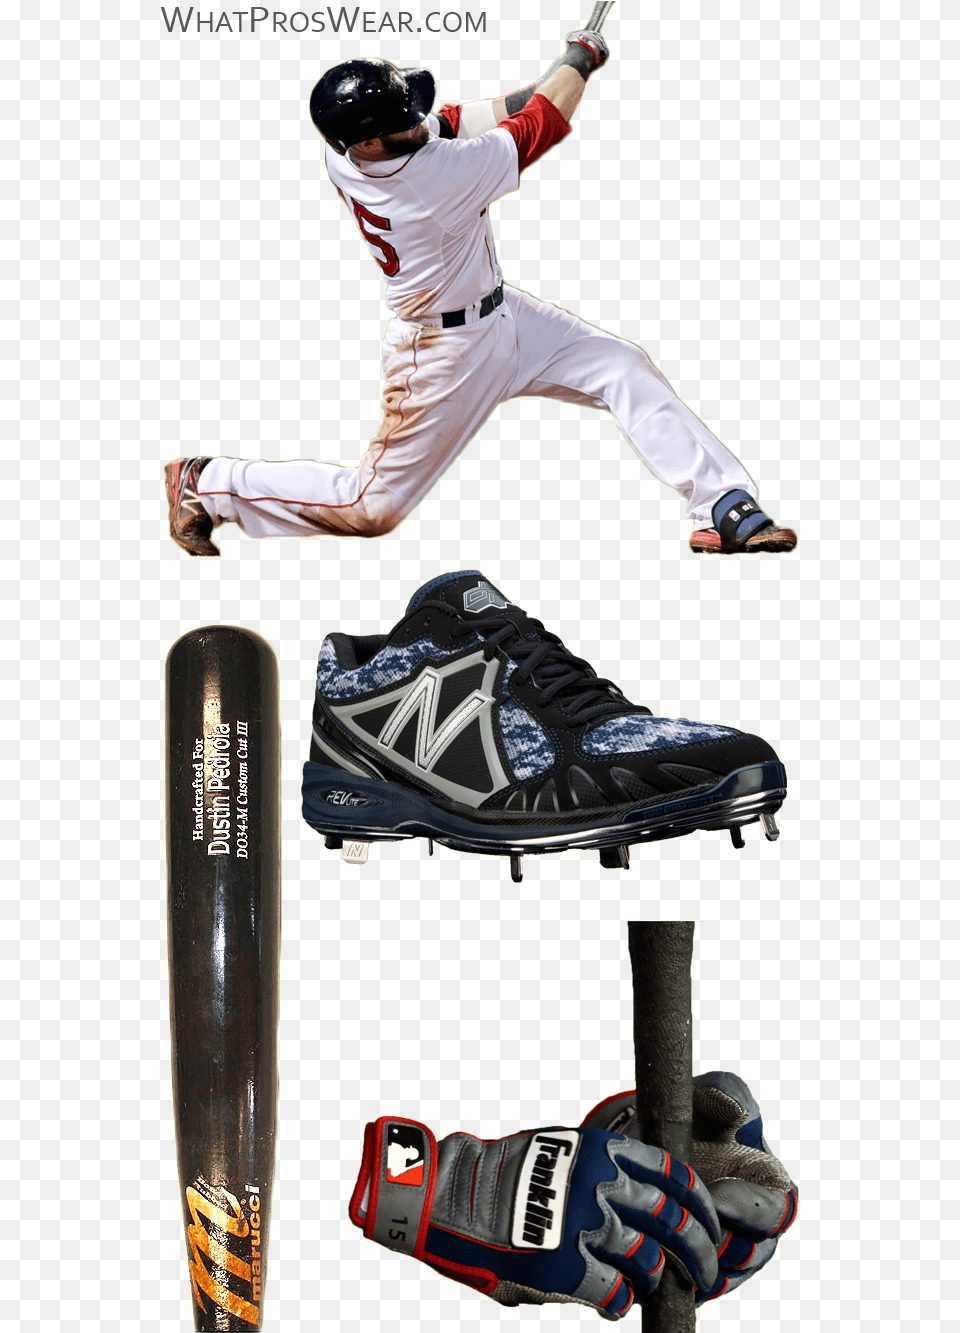 Dustin Pedroia Bat Dustin Pedroia Batting Gloves Jumping, People, Person, Shoe, Glove Png Image